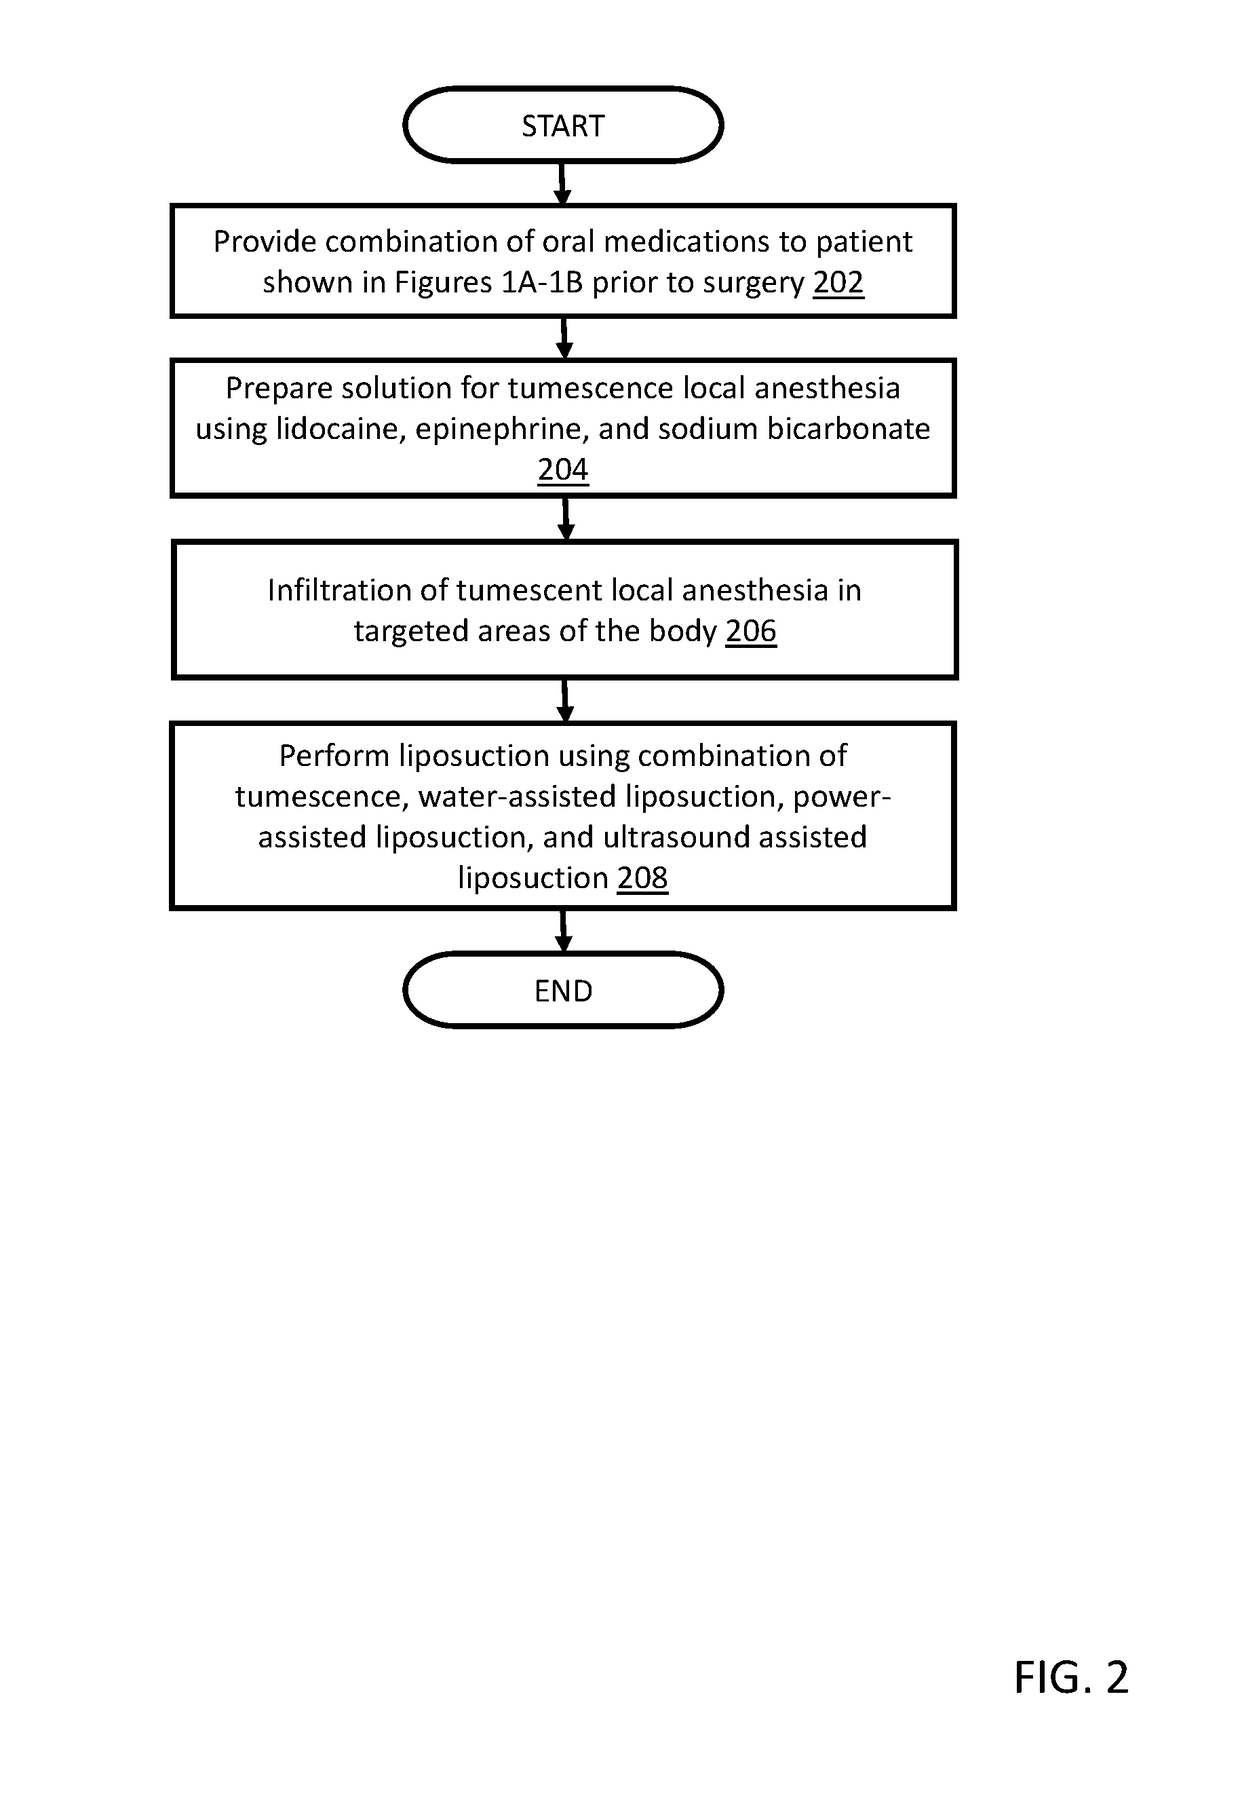 Method for performing cosmetic surgical procedures using tumescent anesthesia and oral sedation